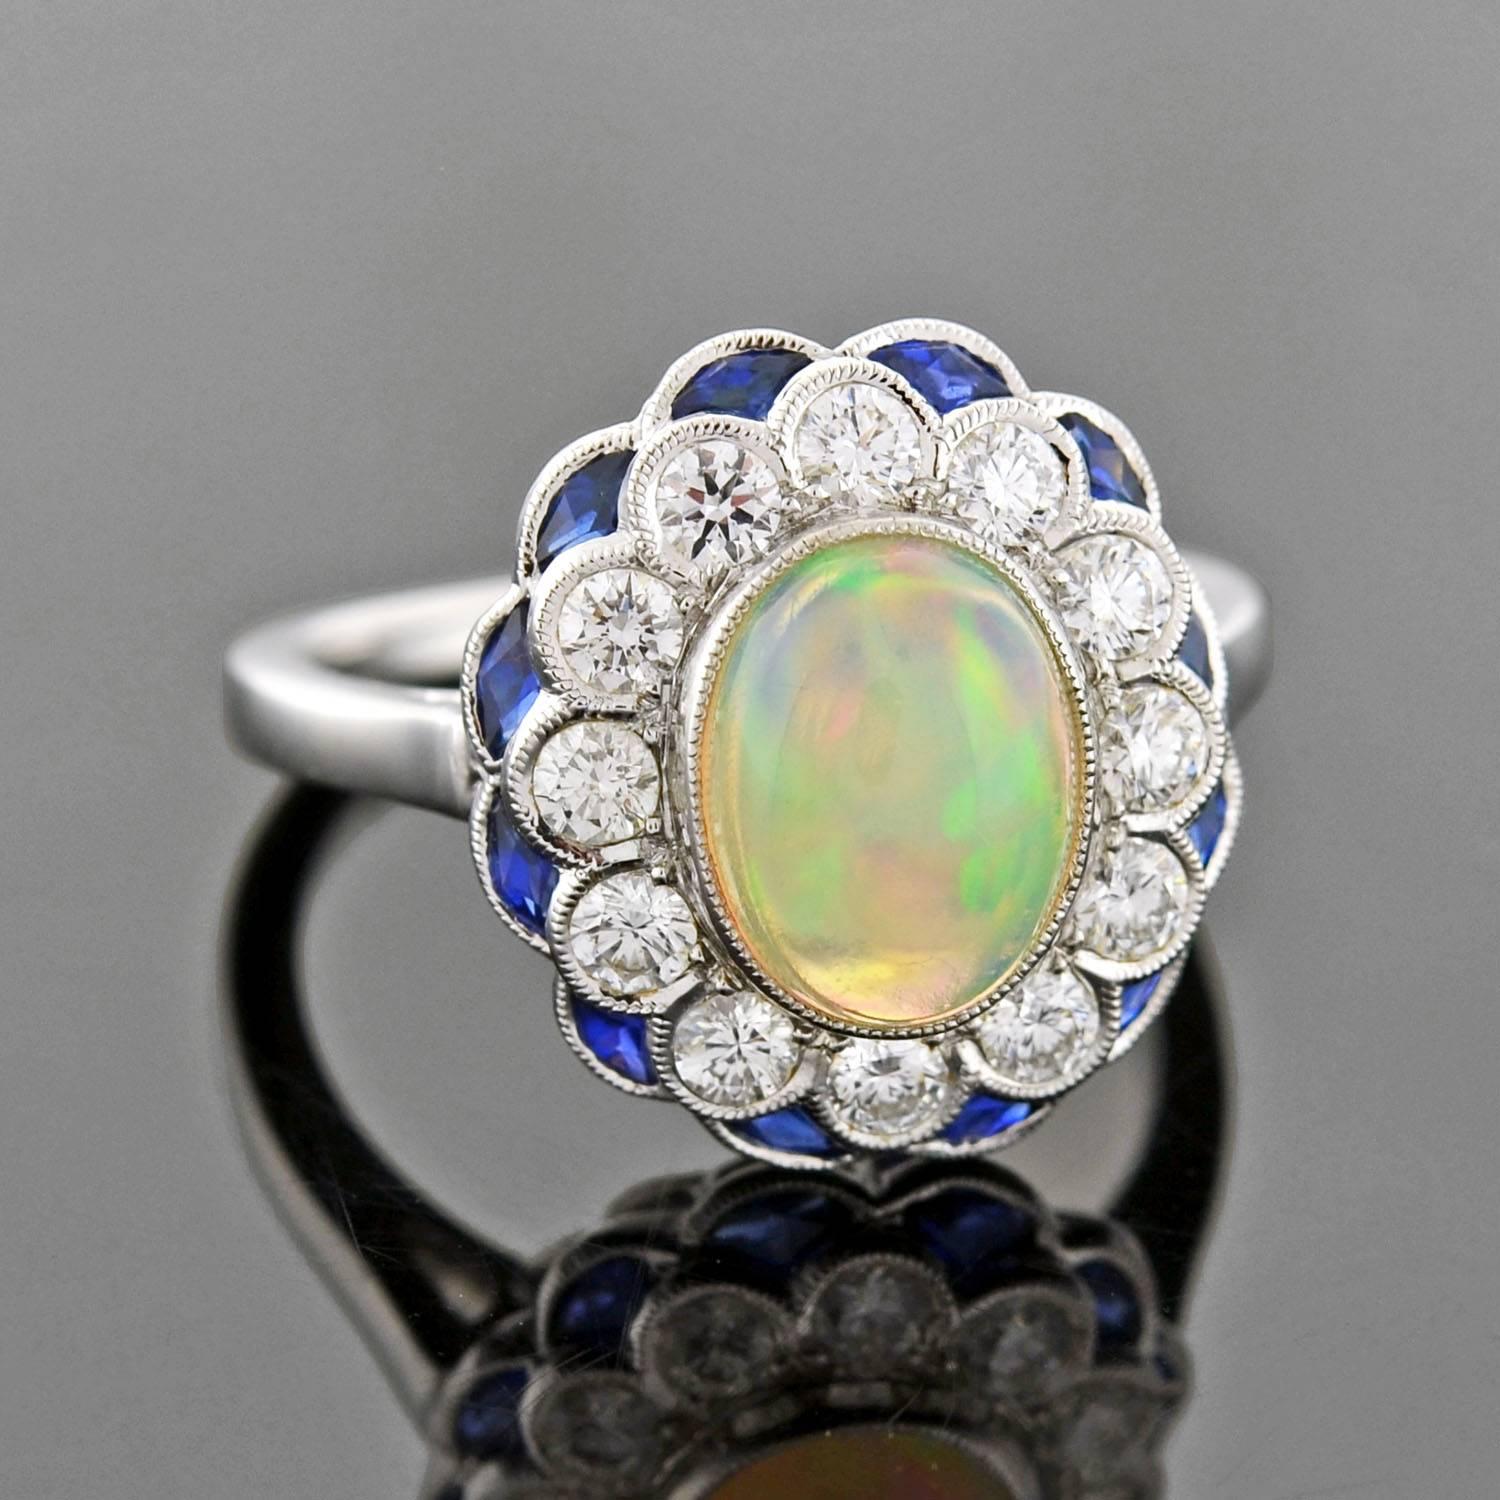 A simply exquisite estate opal ring! This fabulous piece is made of 18kt white gold and has a single oval-shaped cabochon opal stone set in its center. The stone, which is large in size, is bezel set and has magnificent color with hues of green,